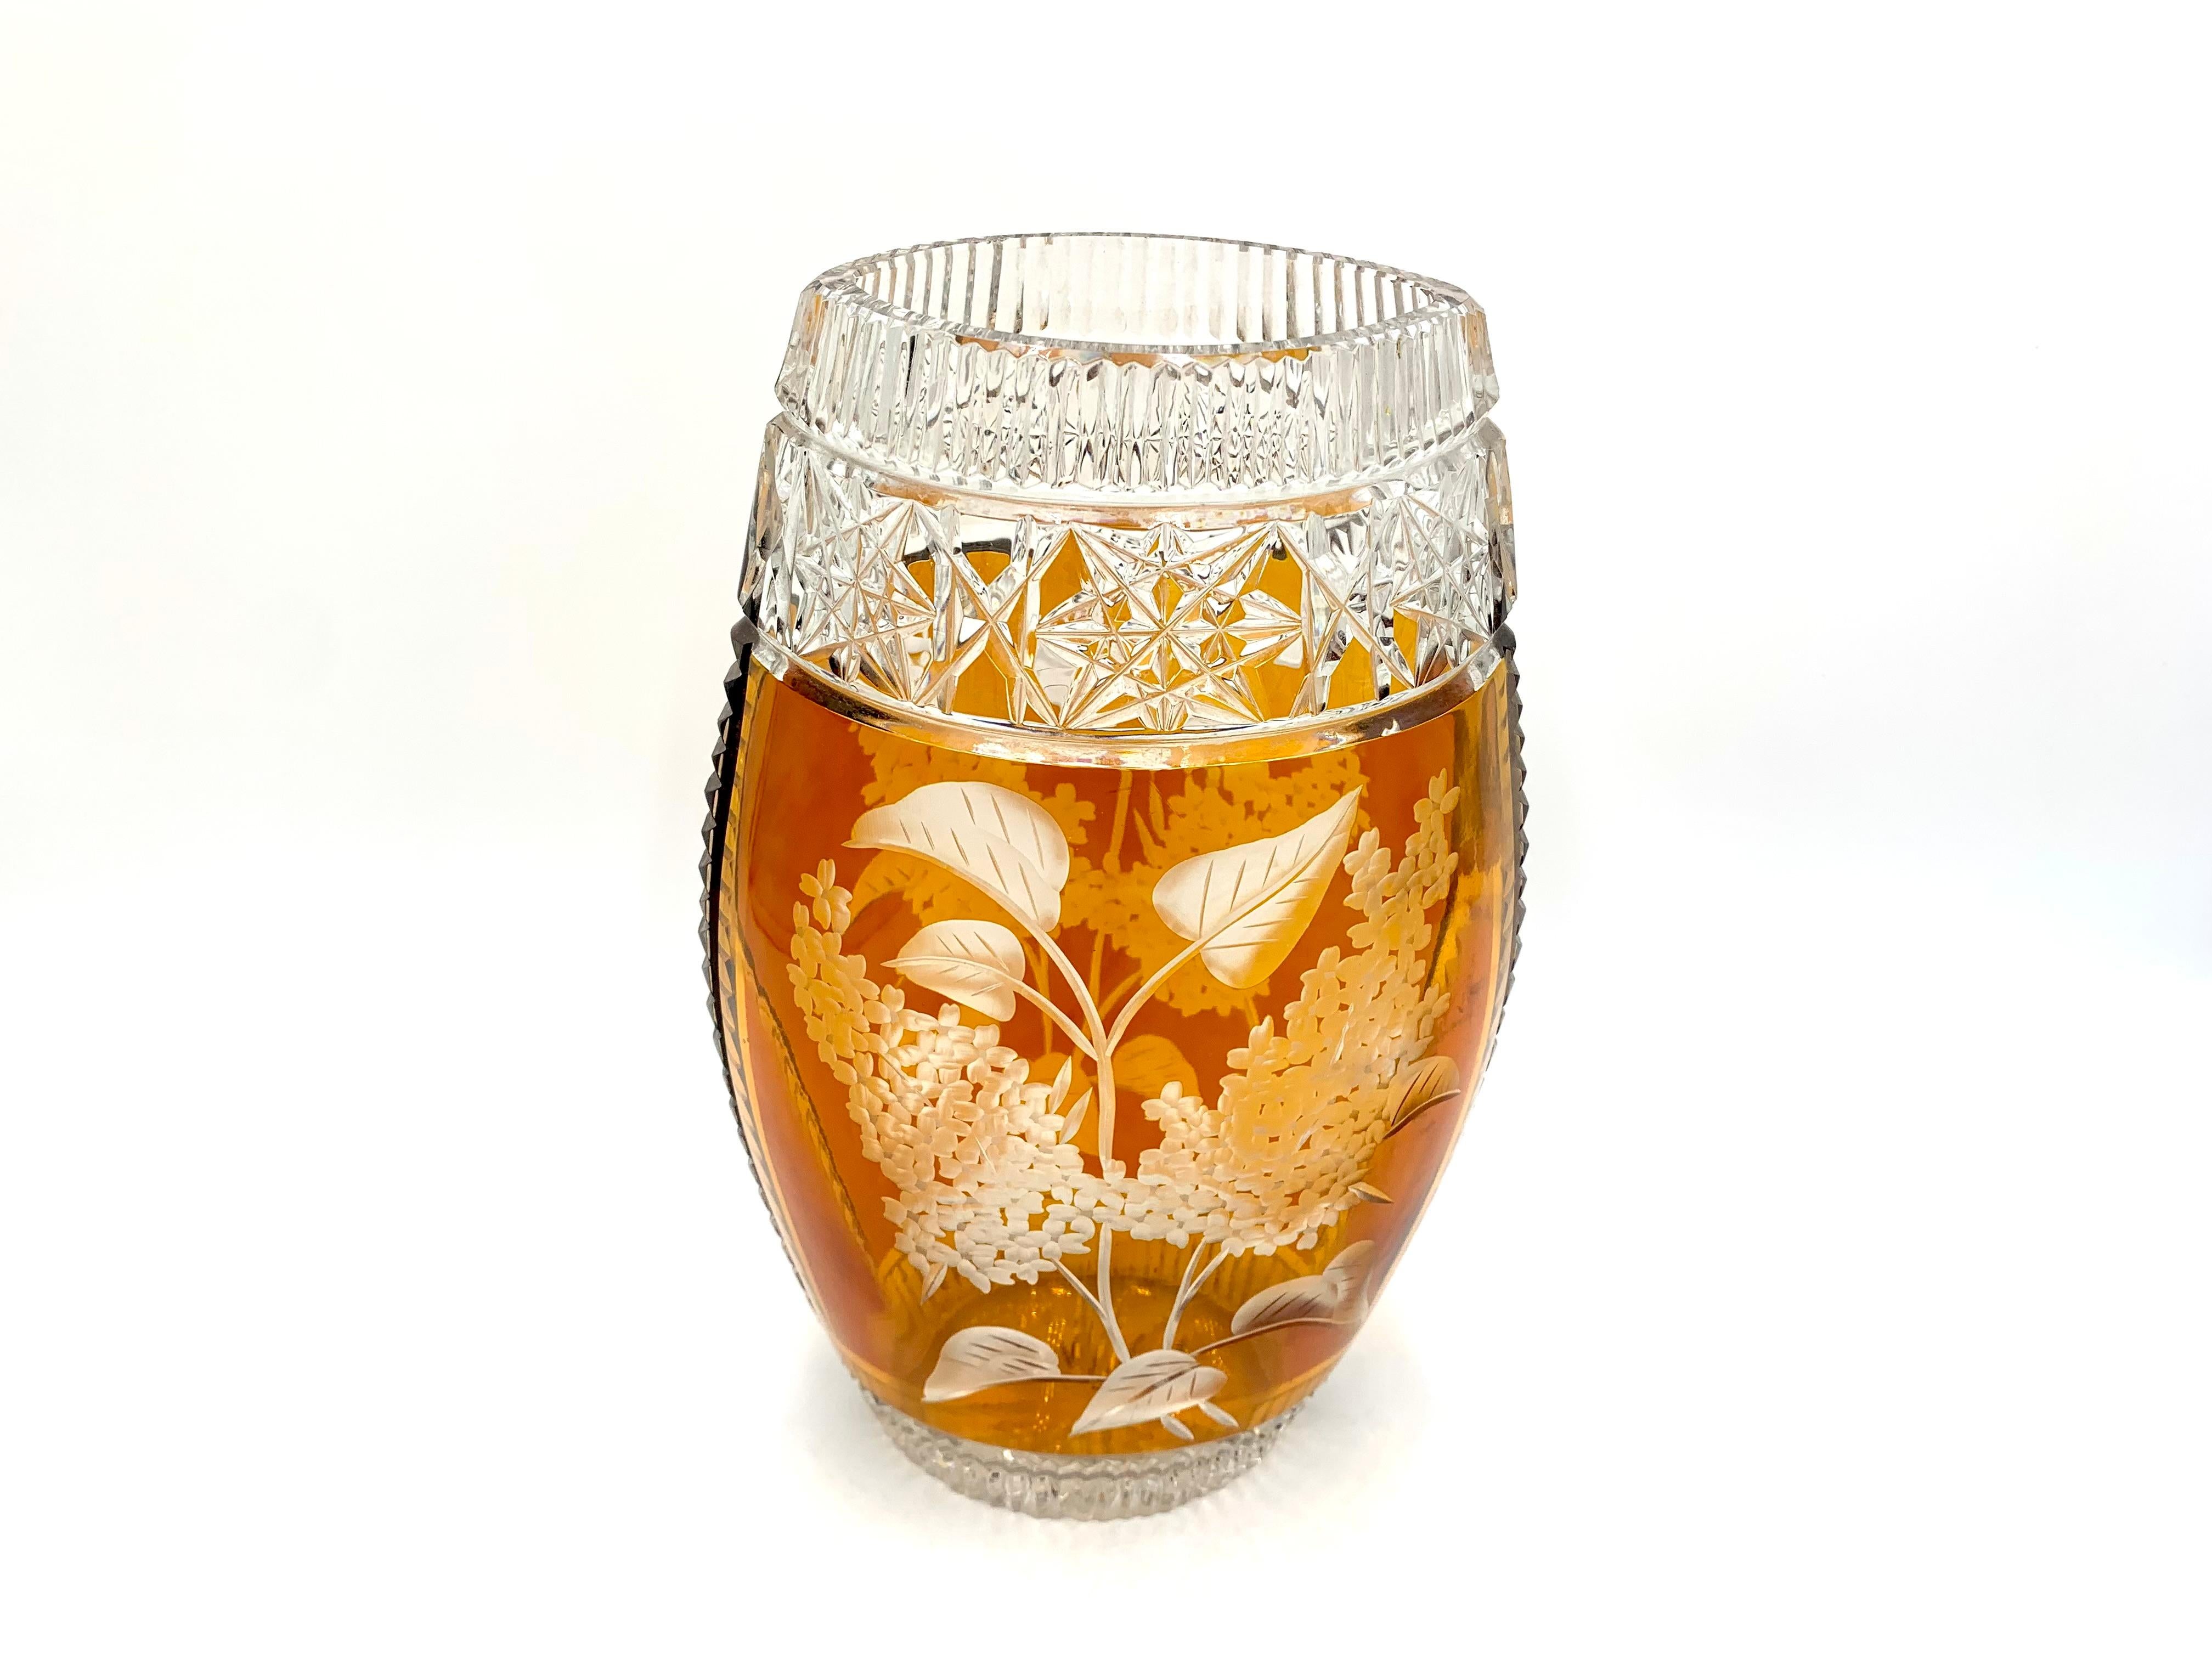 Crystal vase with honey glass and pattern. Produced in Poland by the Julia Glassworks in the 1960s.

Very good condition

Measures: height 30cm, width 13cm, depth 10cm.